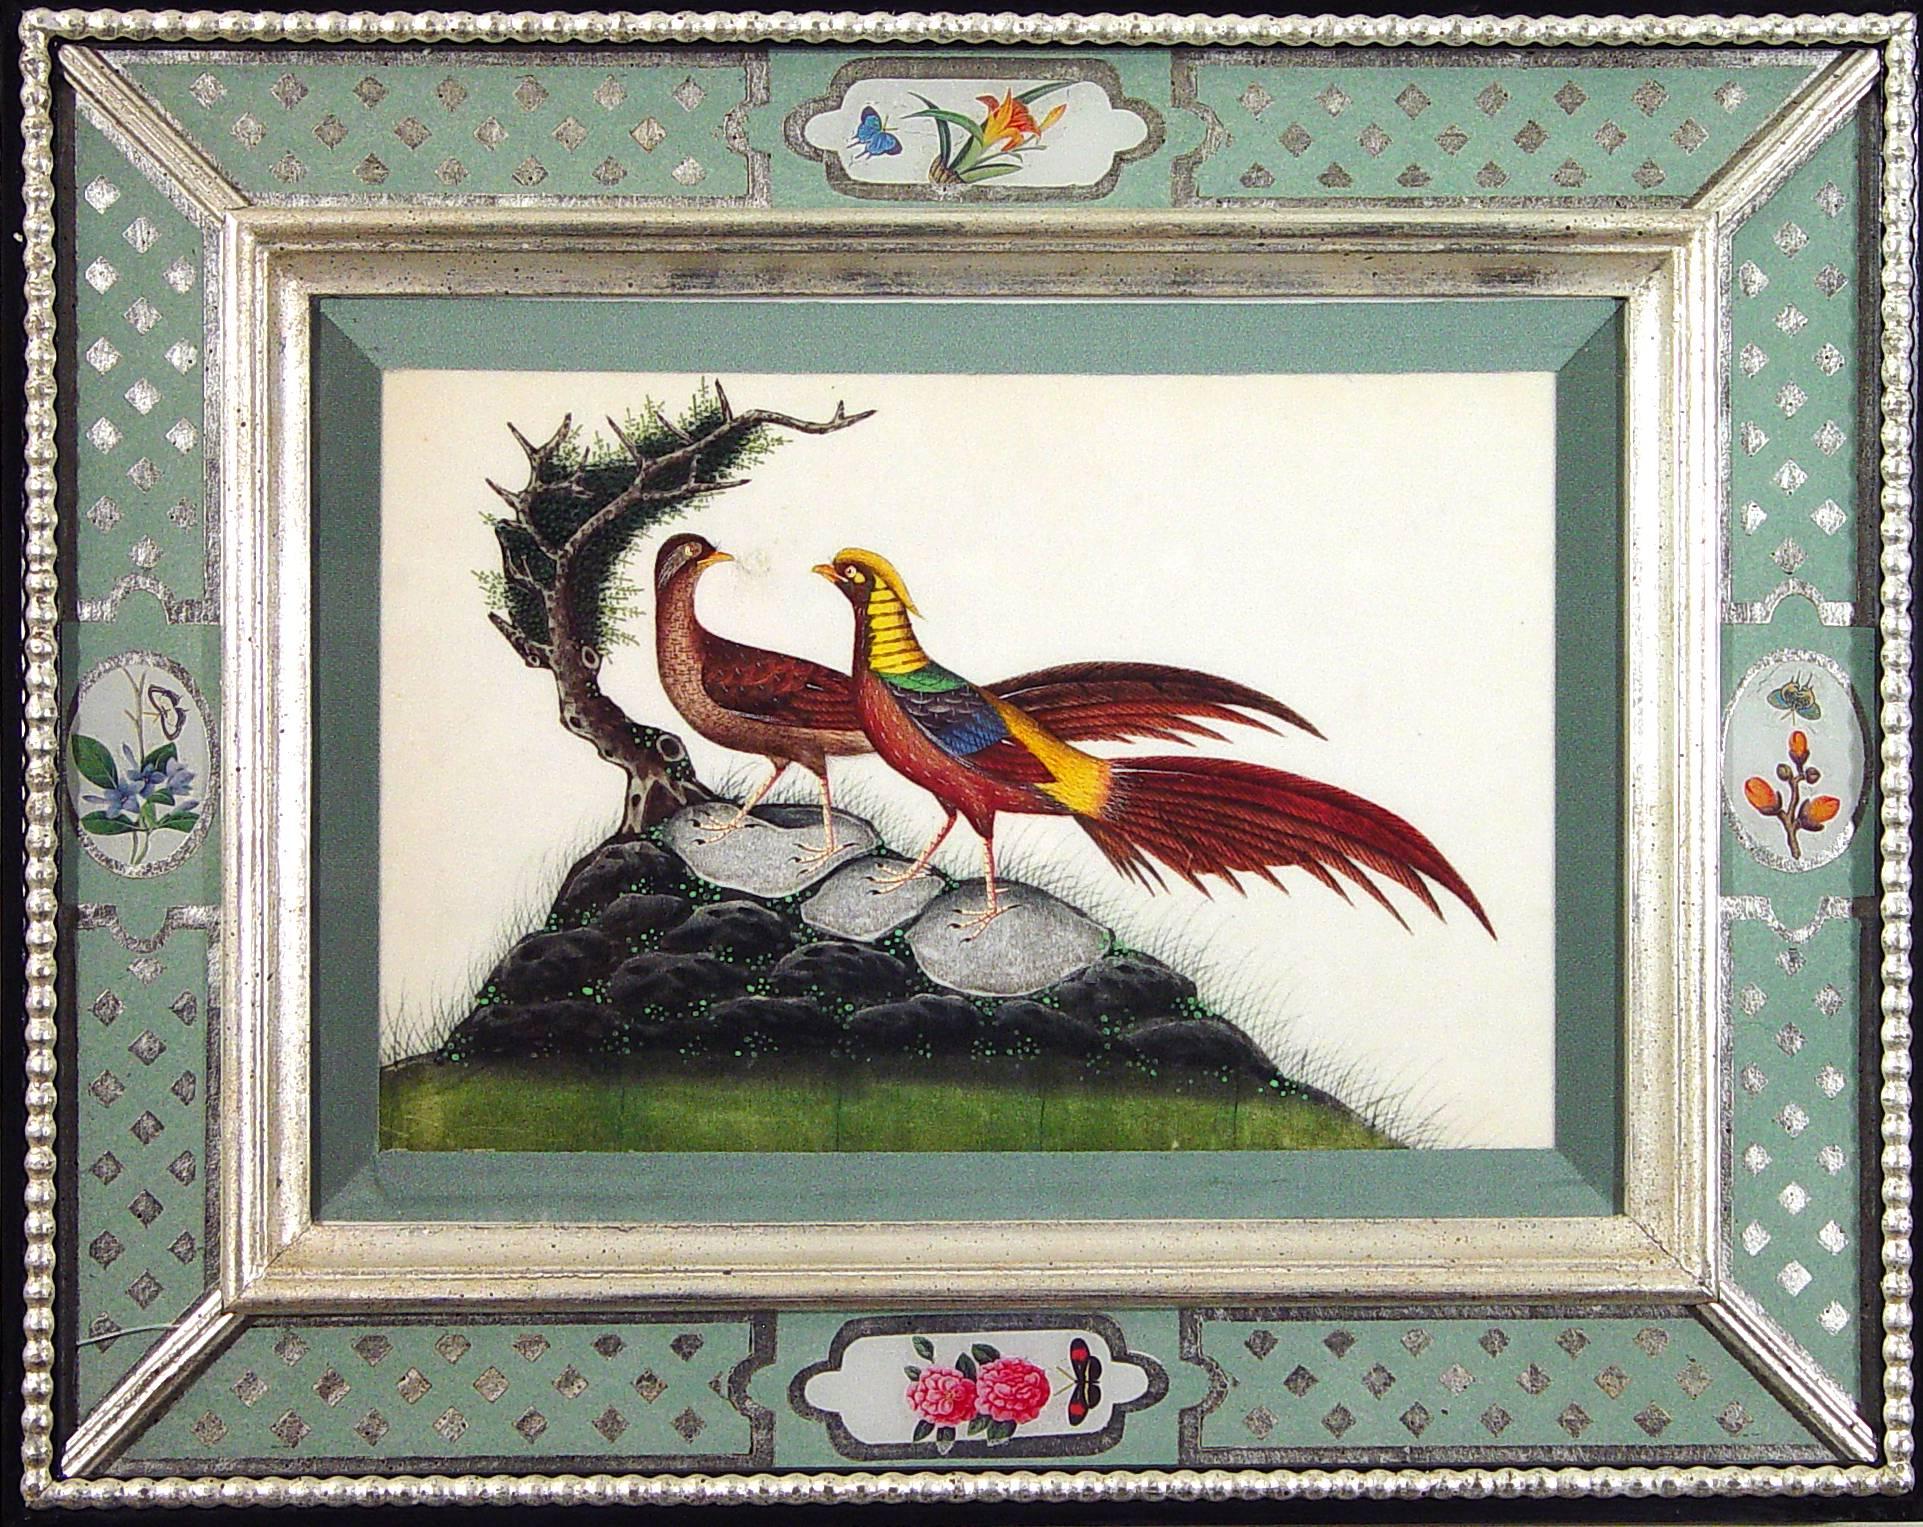 Chinese Export China Trade Watercolors of Birds in Églomisé Frames